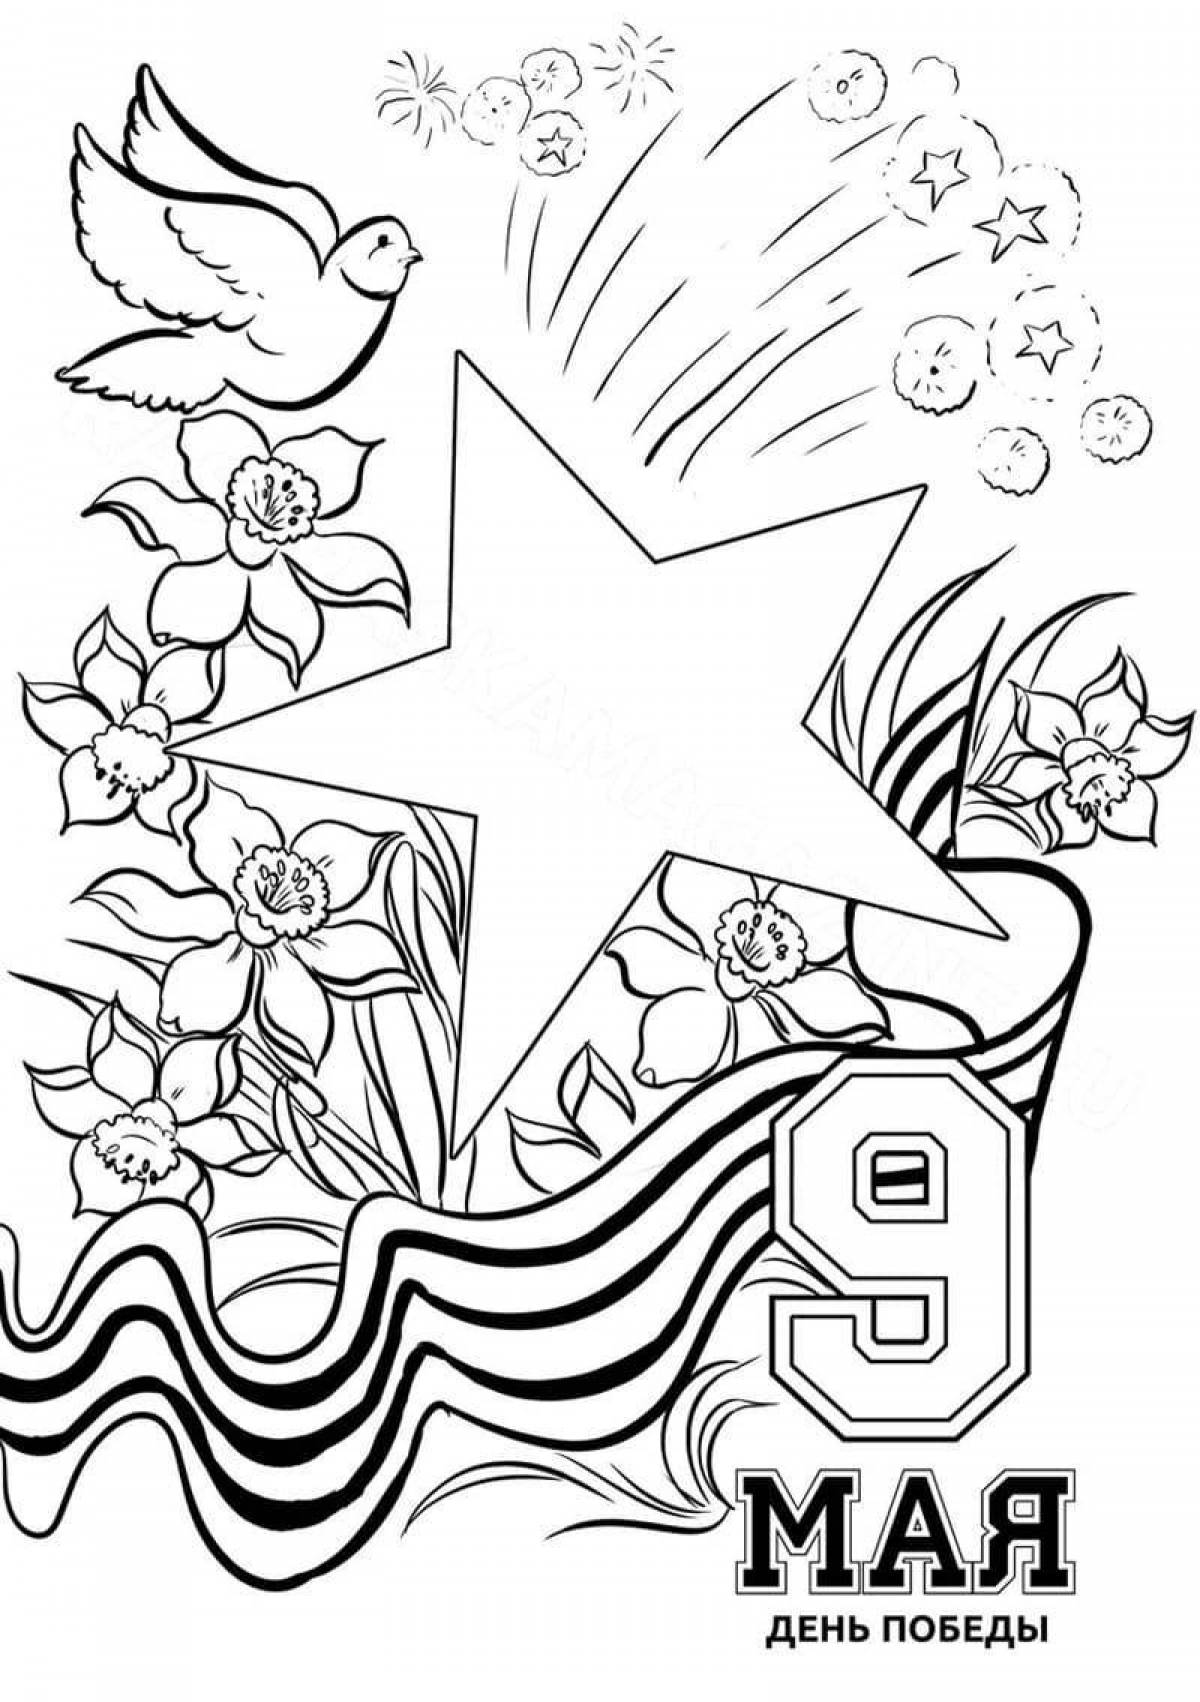 Color-wild May 9 Victory Day coloring book